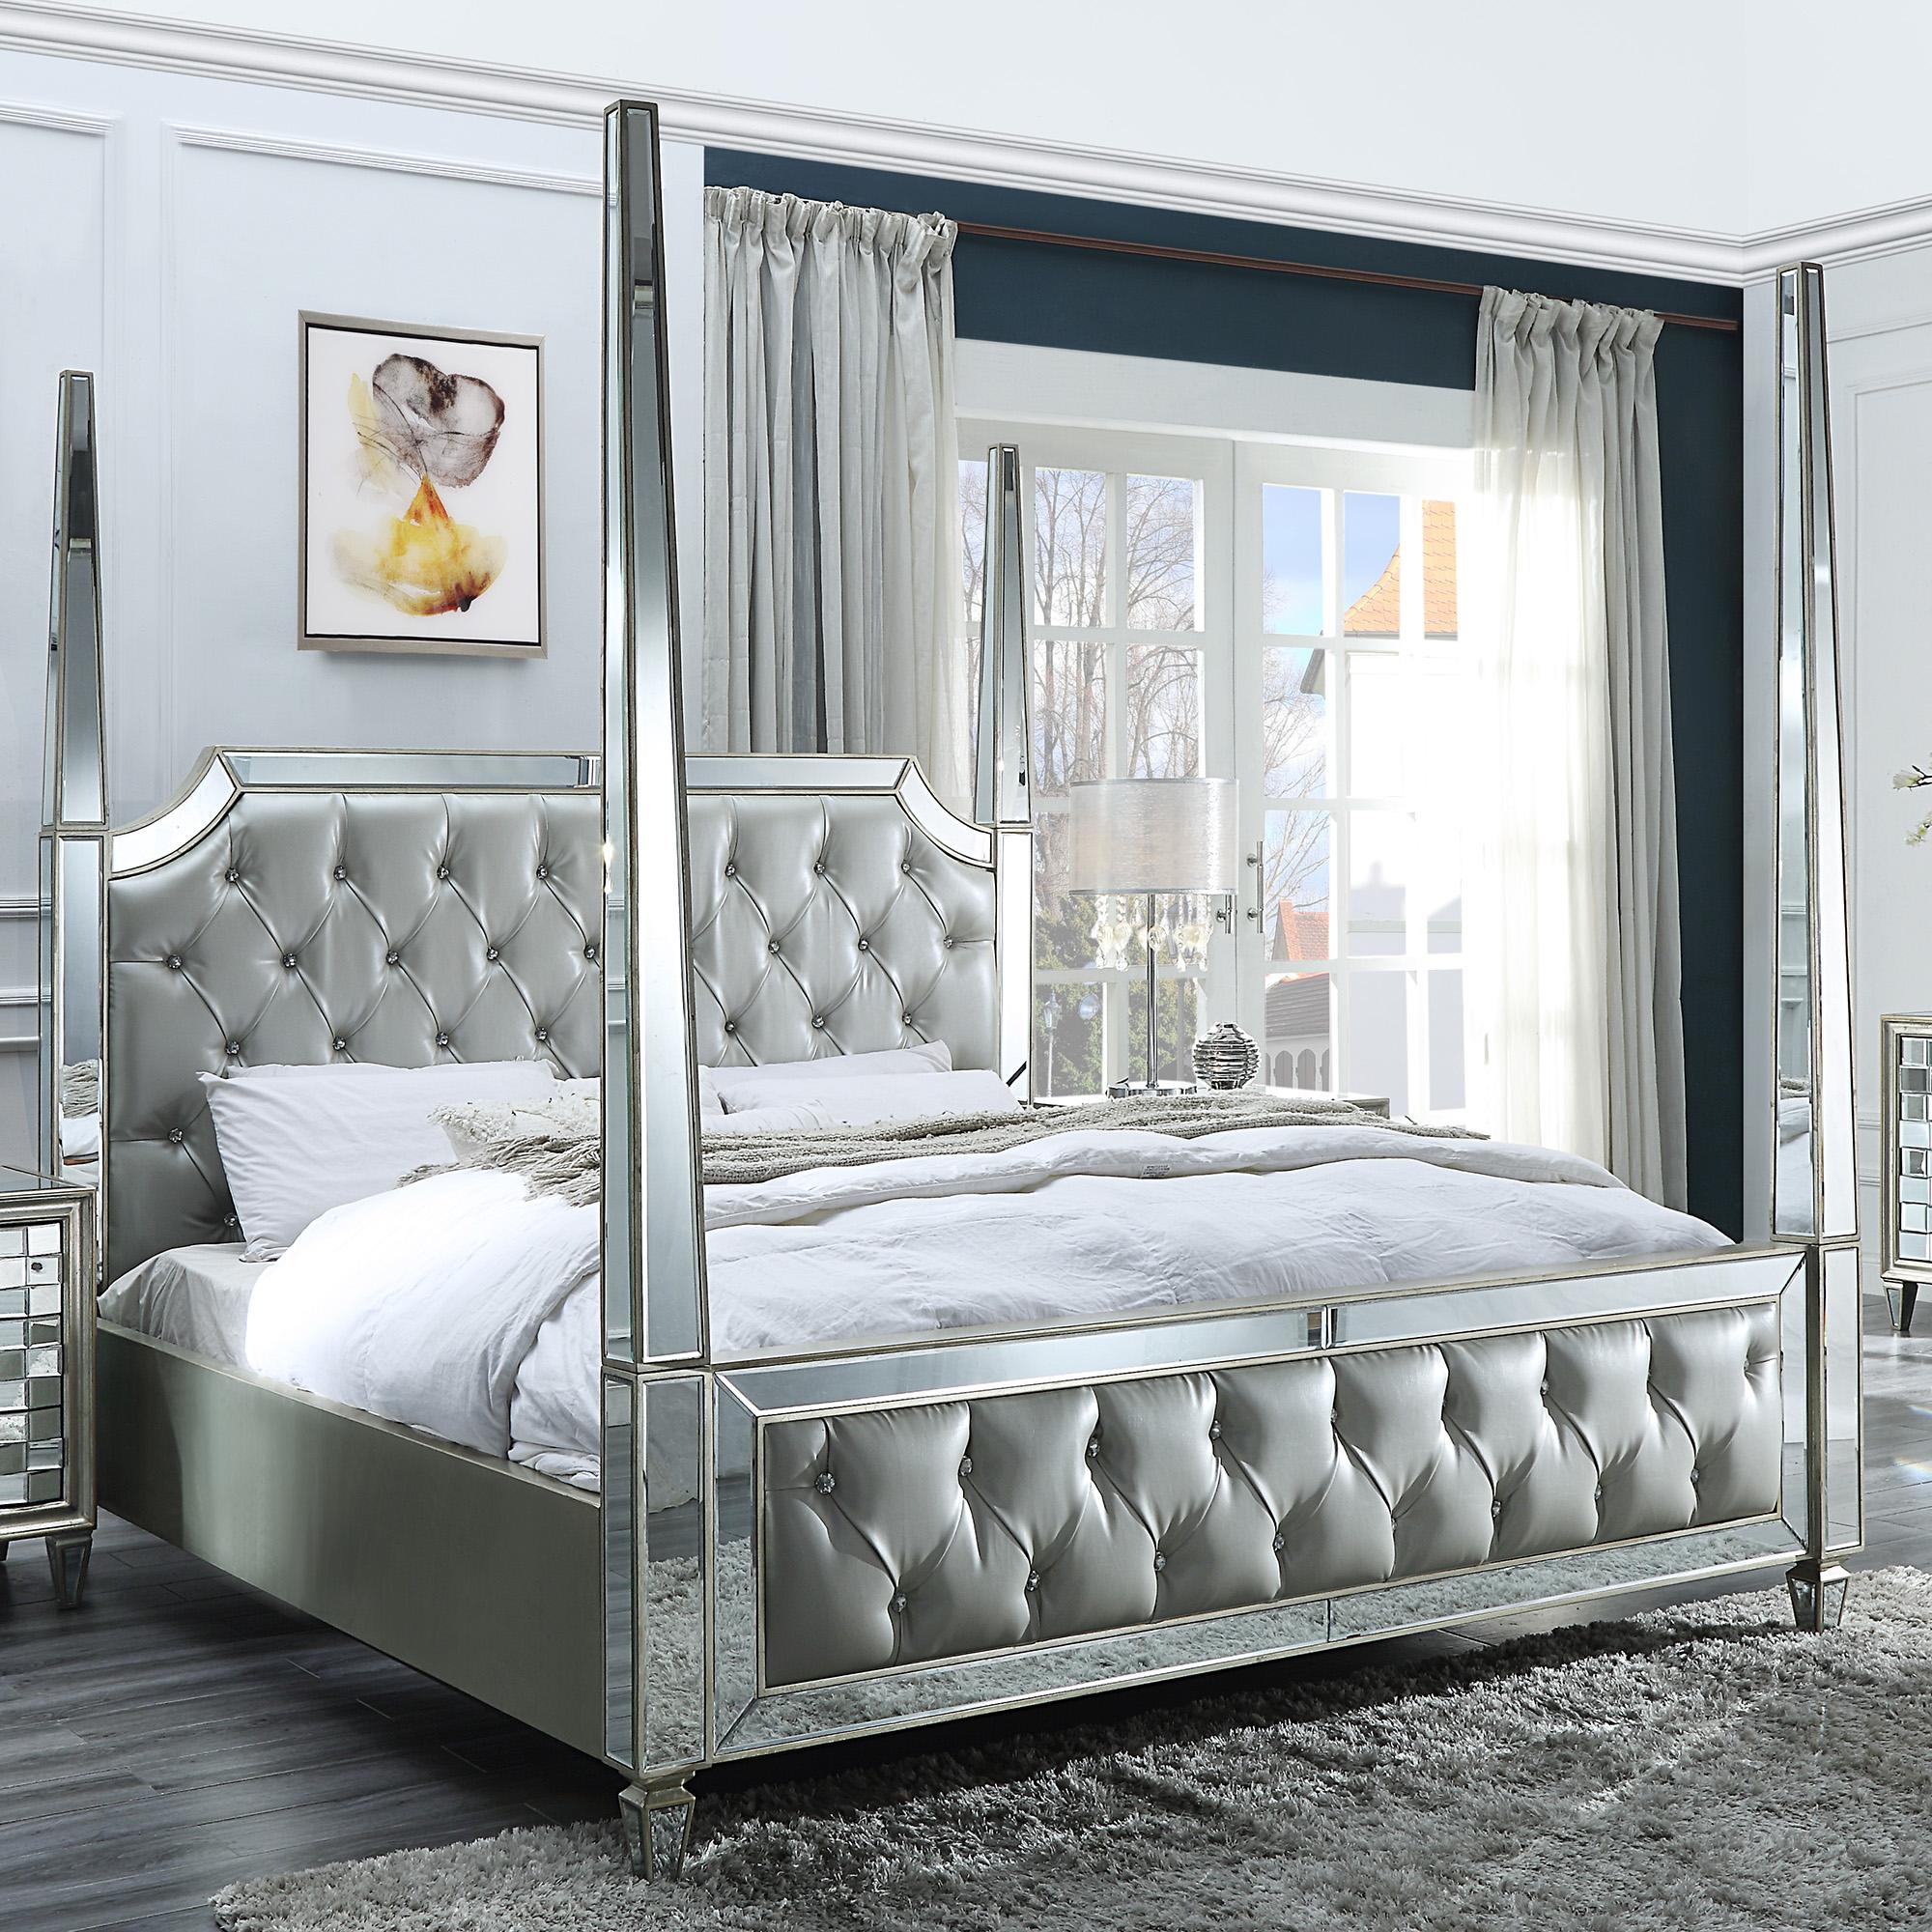 

    
Silver & Mirror CAL King Canopy Bed Modern Homey Design HD-6001
